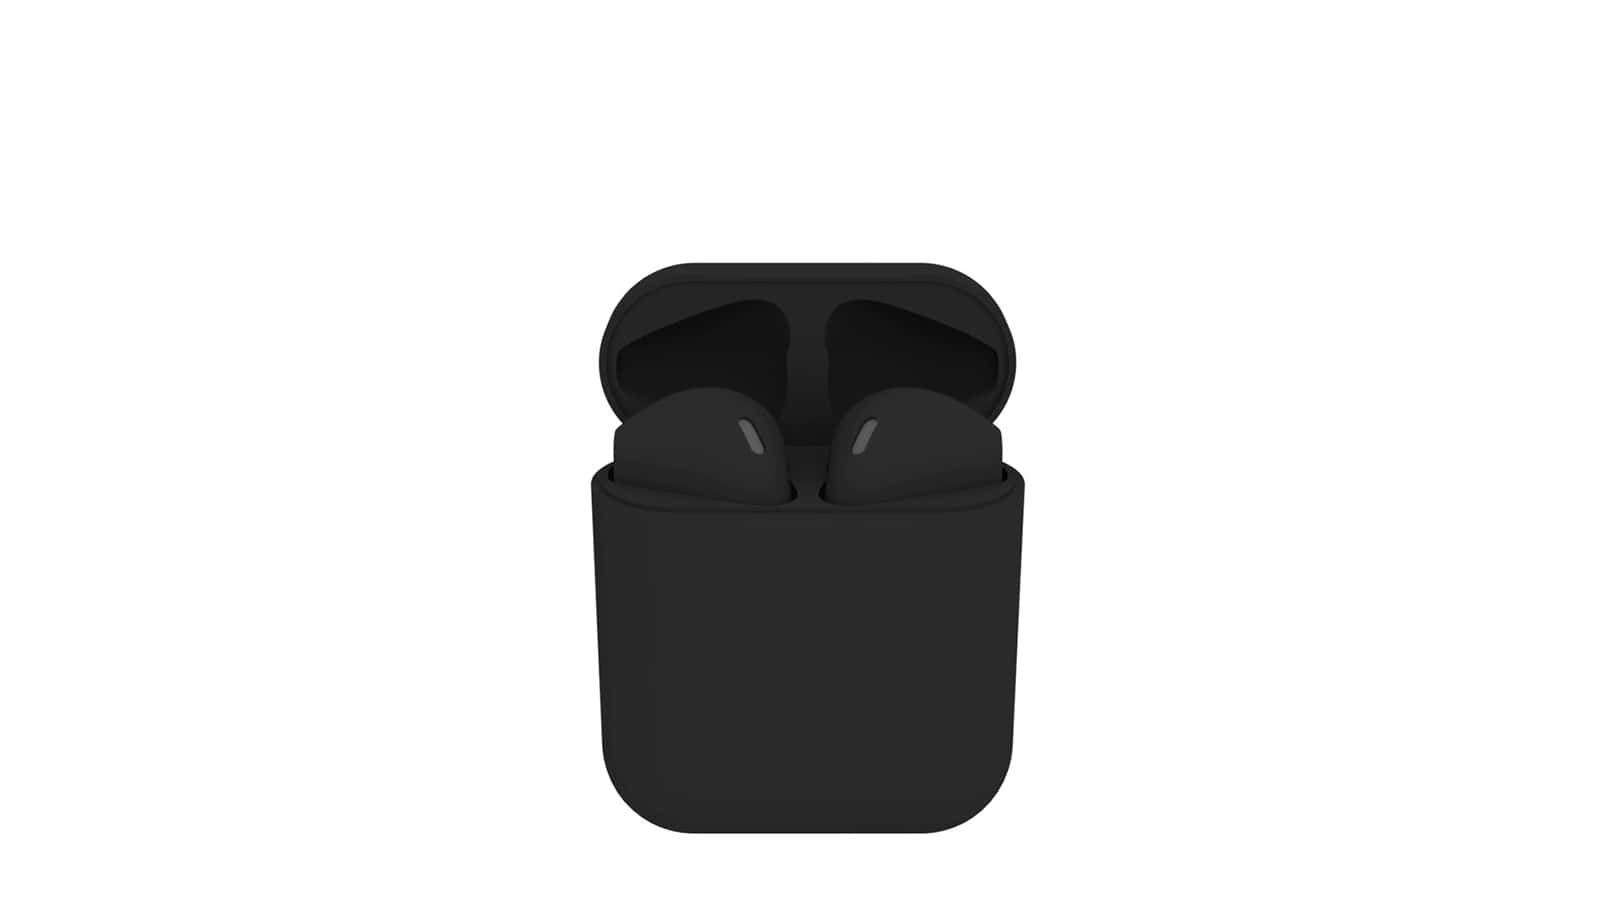 Black AirPods Exist Thanks To BlackPods